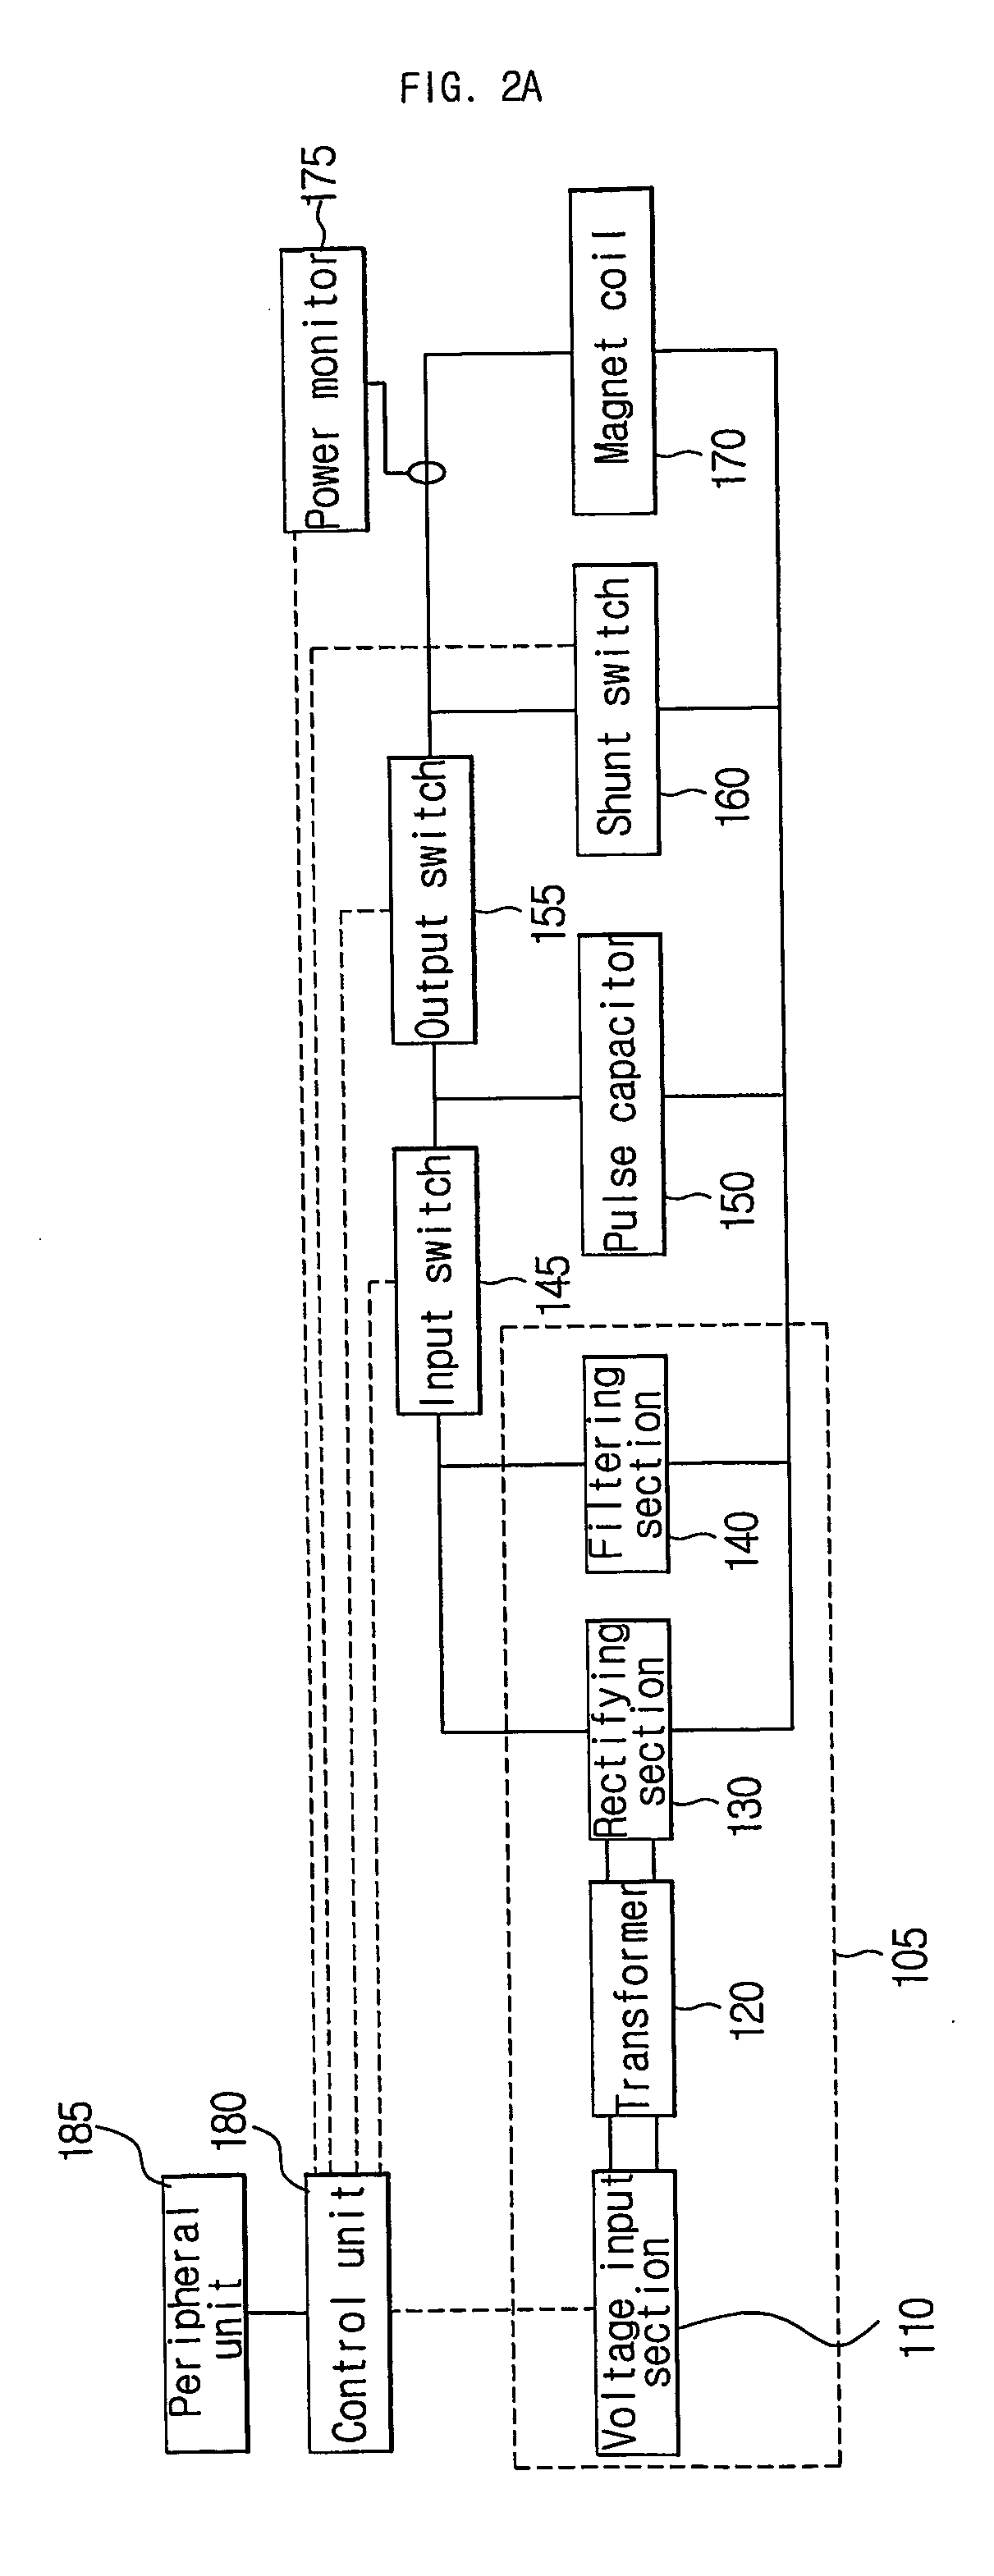 Apparatus and method for creating pulse magnetic stimulation having modulation function